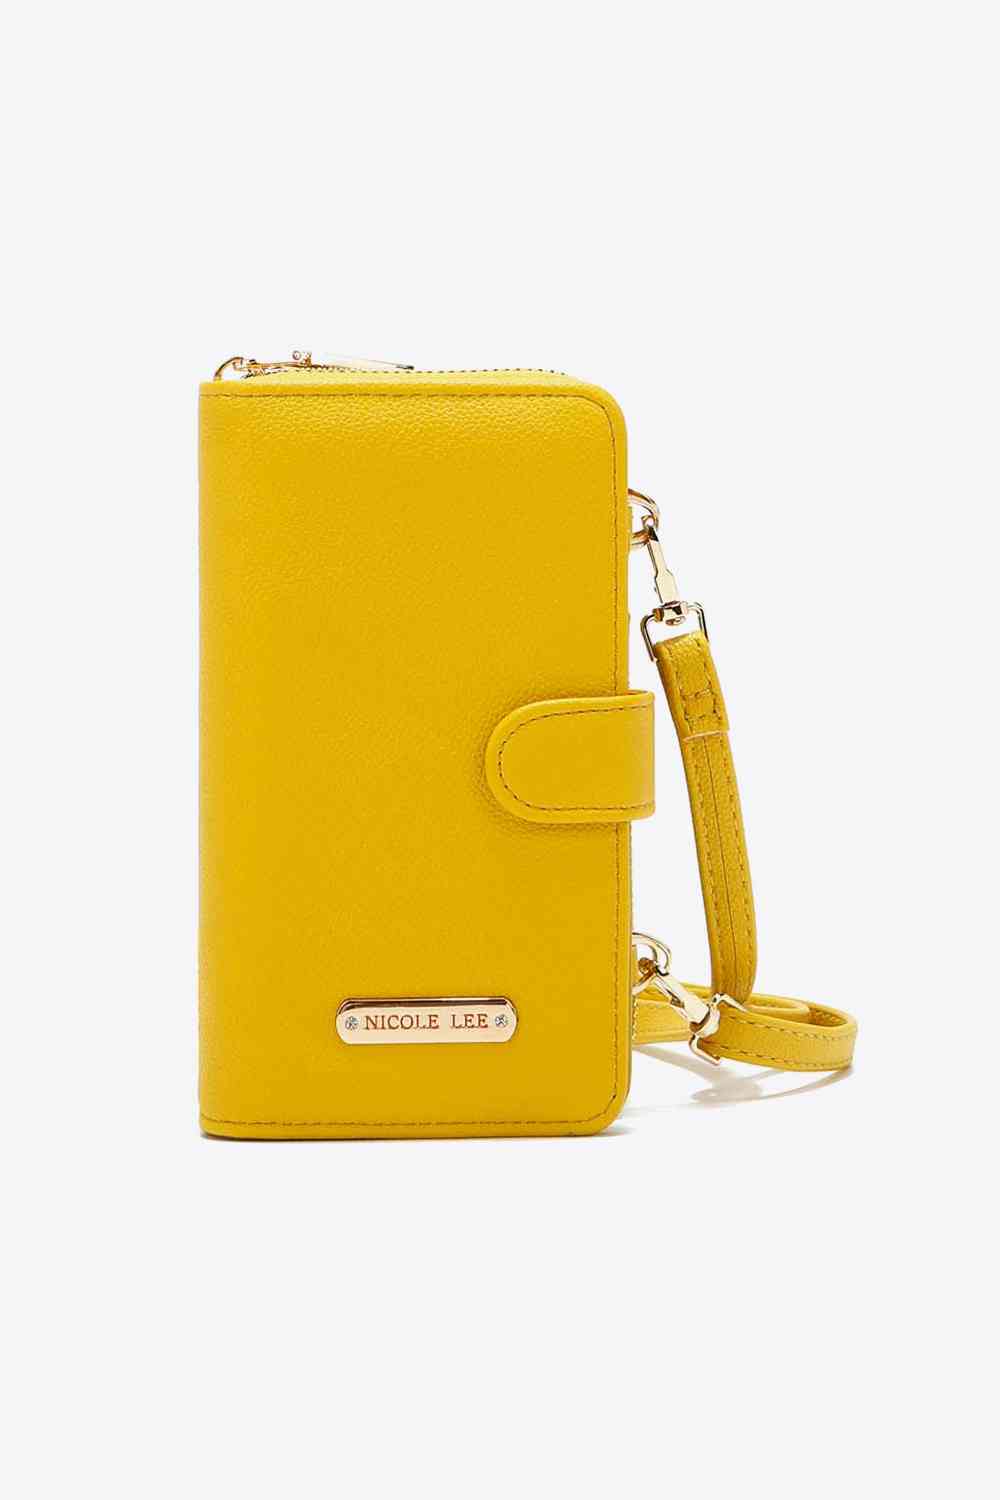 Goldenrod Nicole Lee USA Two-Piece Crossbody Phone Case Wallet Sentient Beauty Fashions Apparel & Accessories